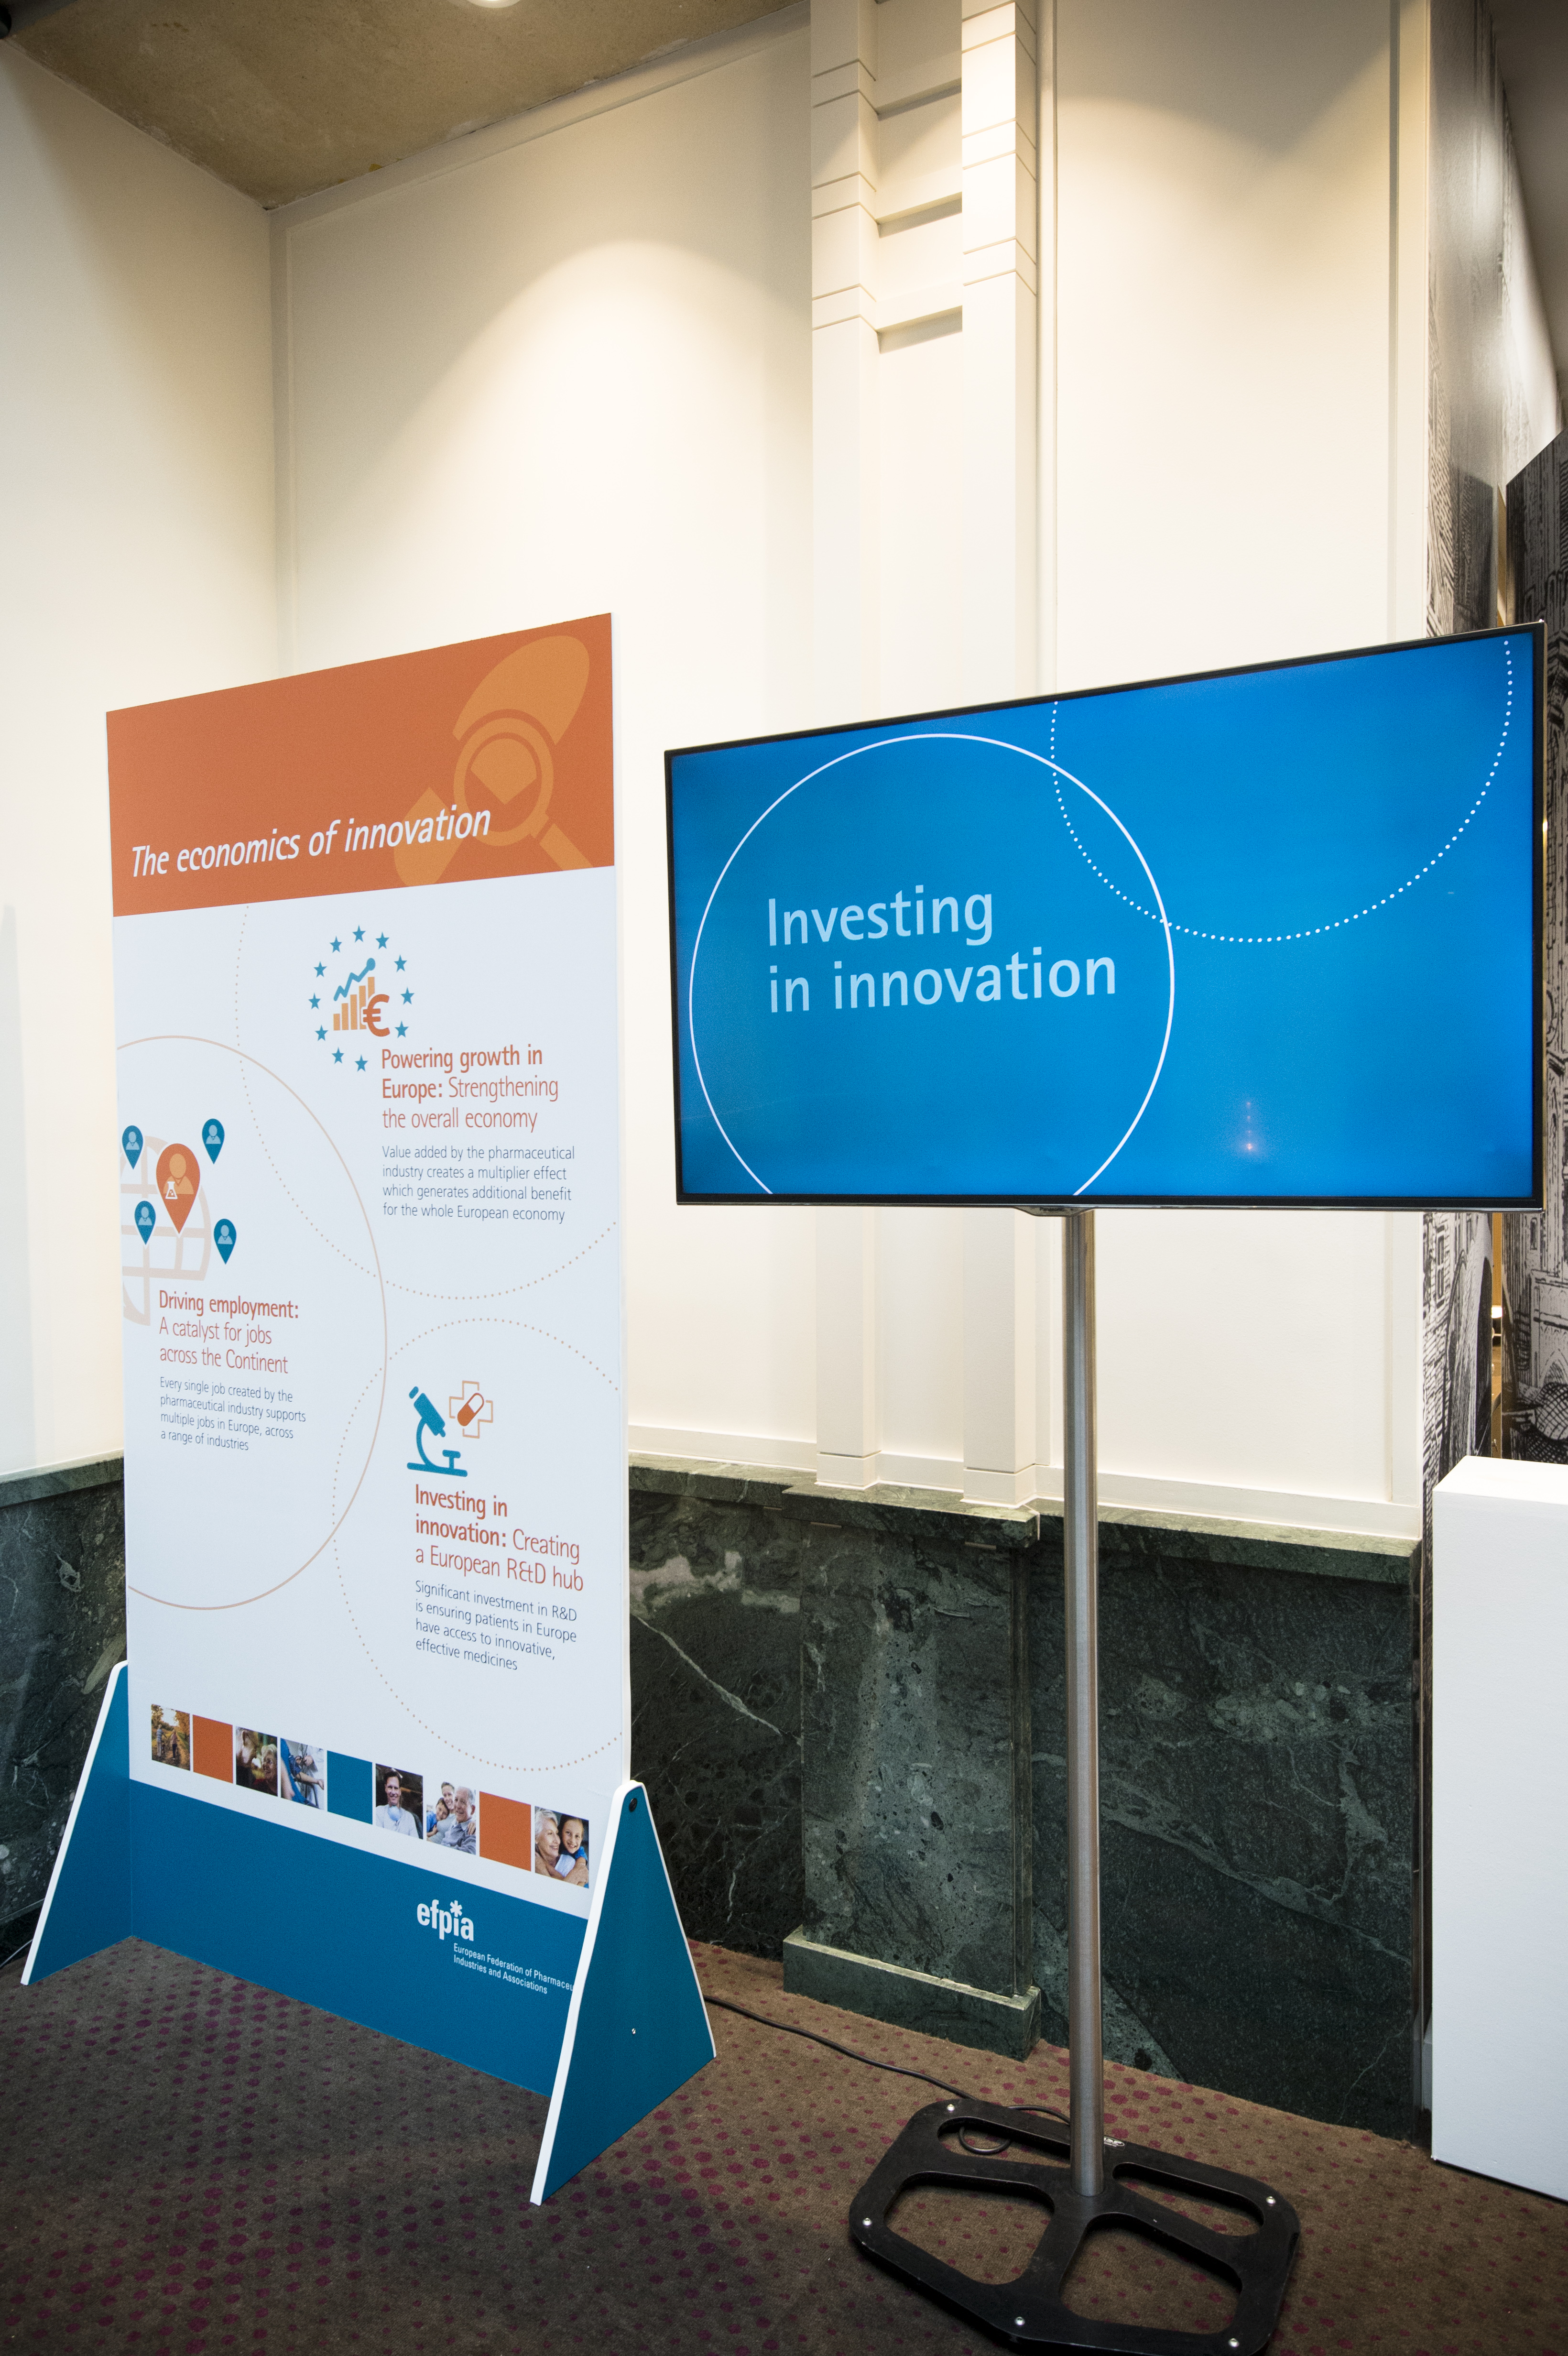 EFPIA Annual Meeting 2016 - The economics of innovation (Investing in innovation)